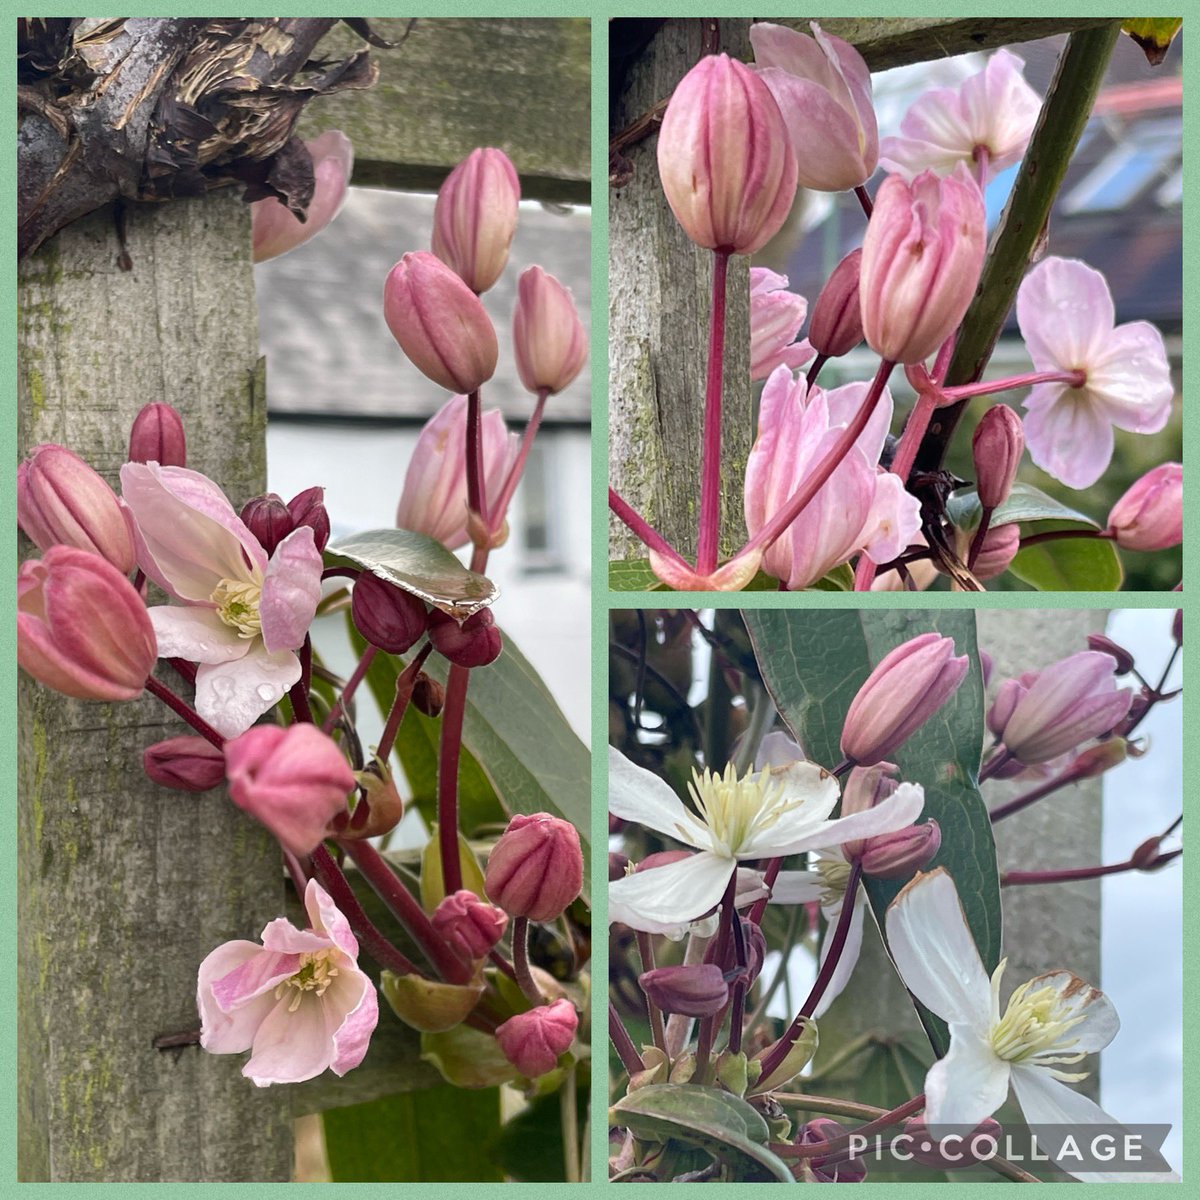 Clematis armandii ‘Appleblossom’ popping out now. 🌸💕

Wish you all a fabulous weekend.  🌿🌸 Happy gardening.

#GardeningTwitter #Flowers #SpringGardenDays
#DollysCottageGarden